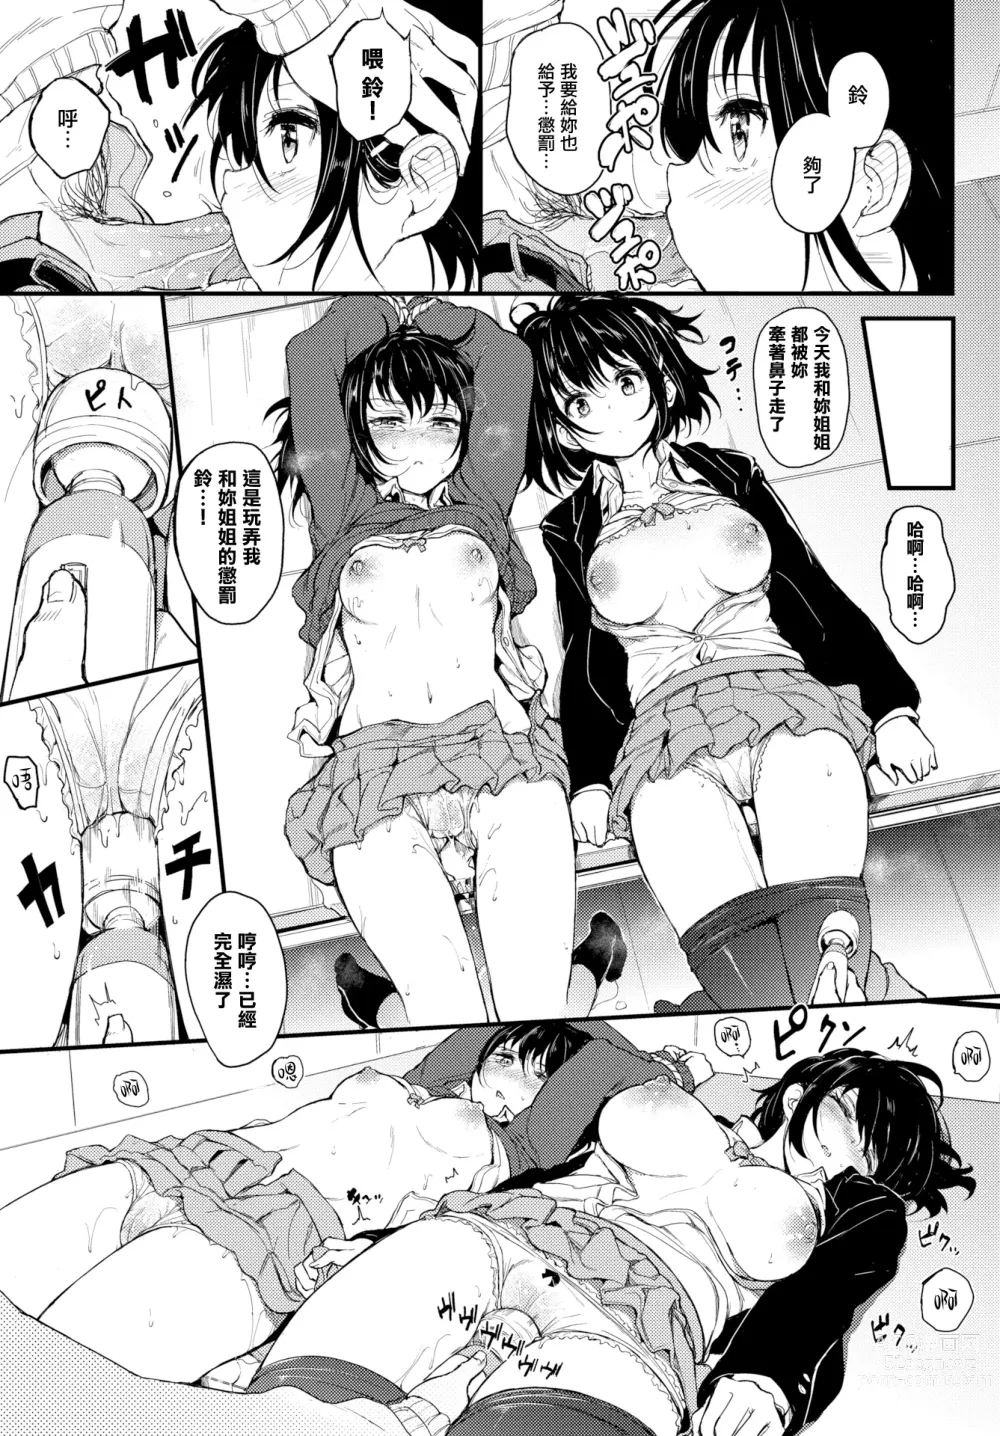 Page 15 of doujinshi 楓と鈴 1-7